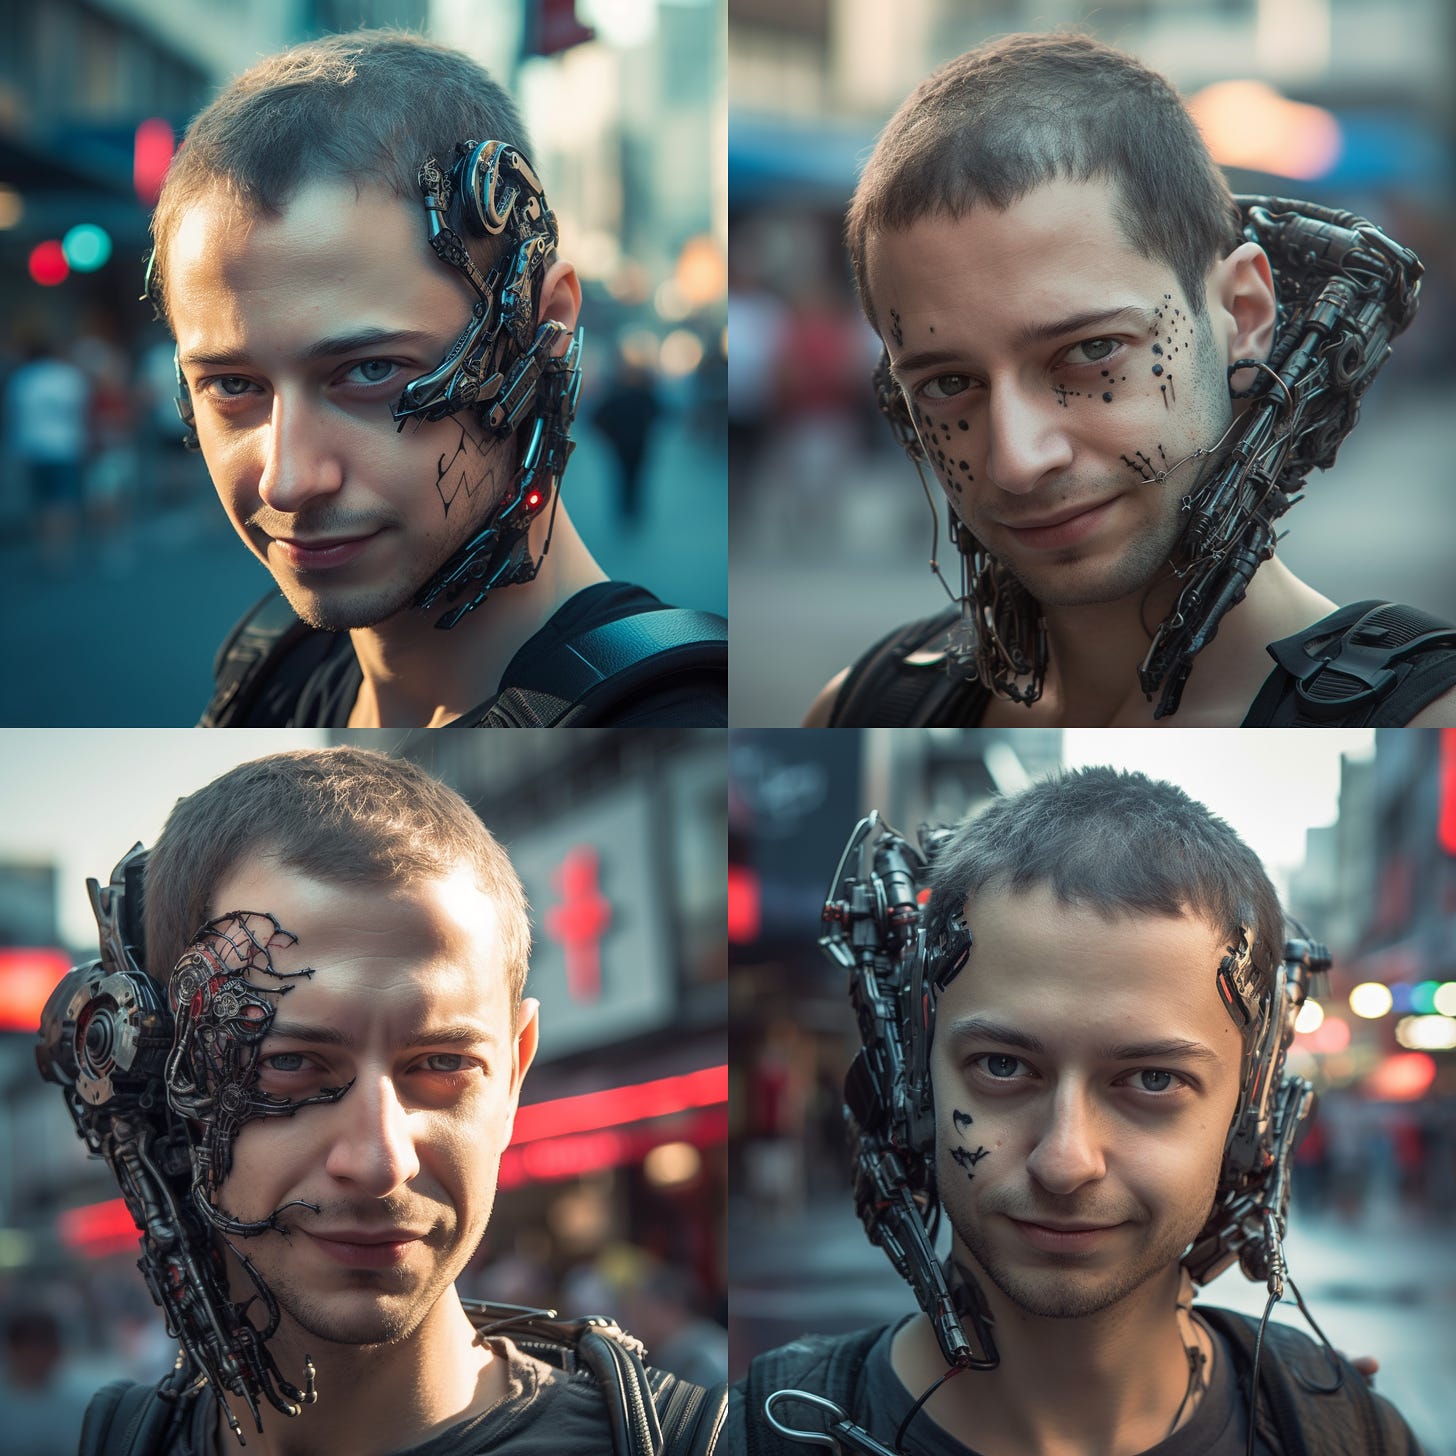 4-image grid in Midjourney for the "cyberpunk cyborg" prompt